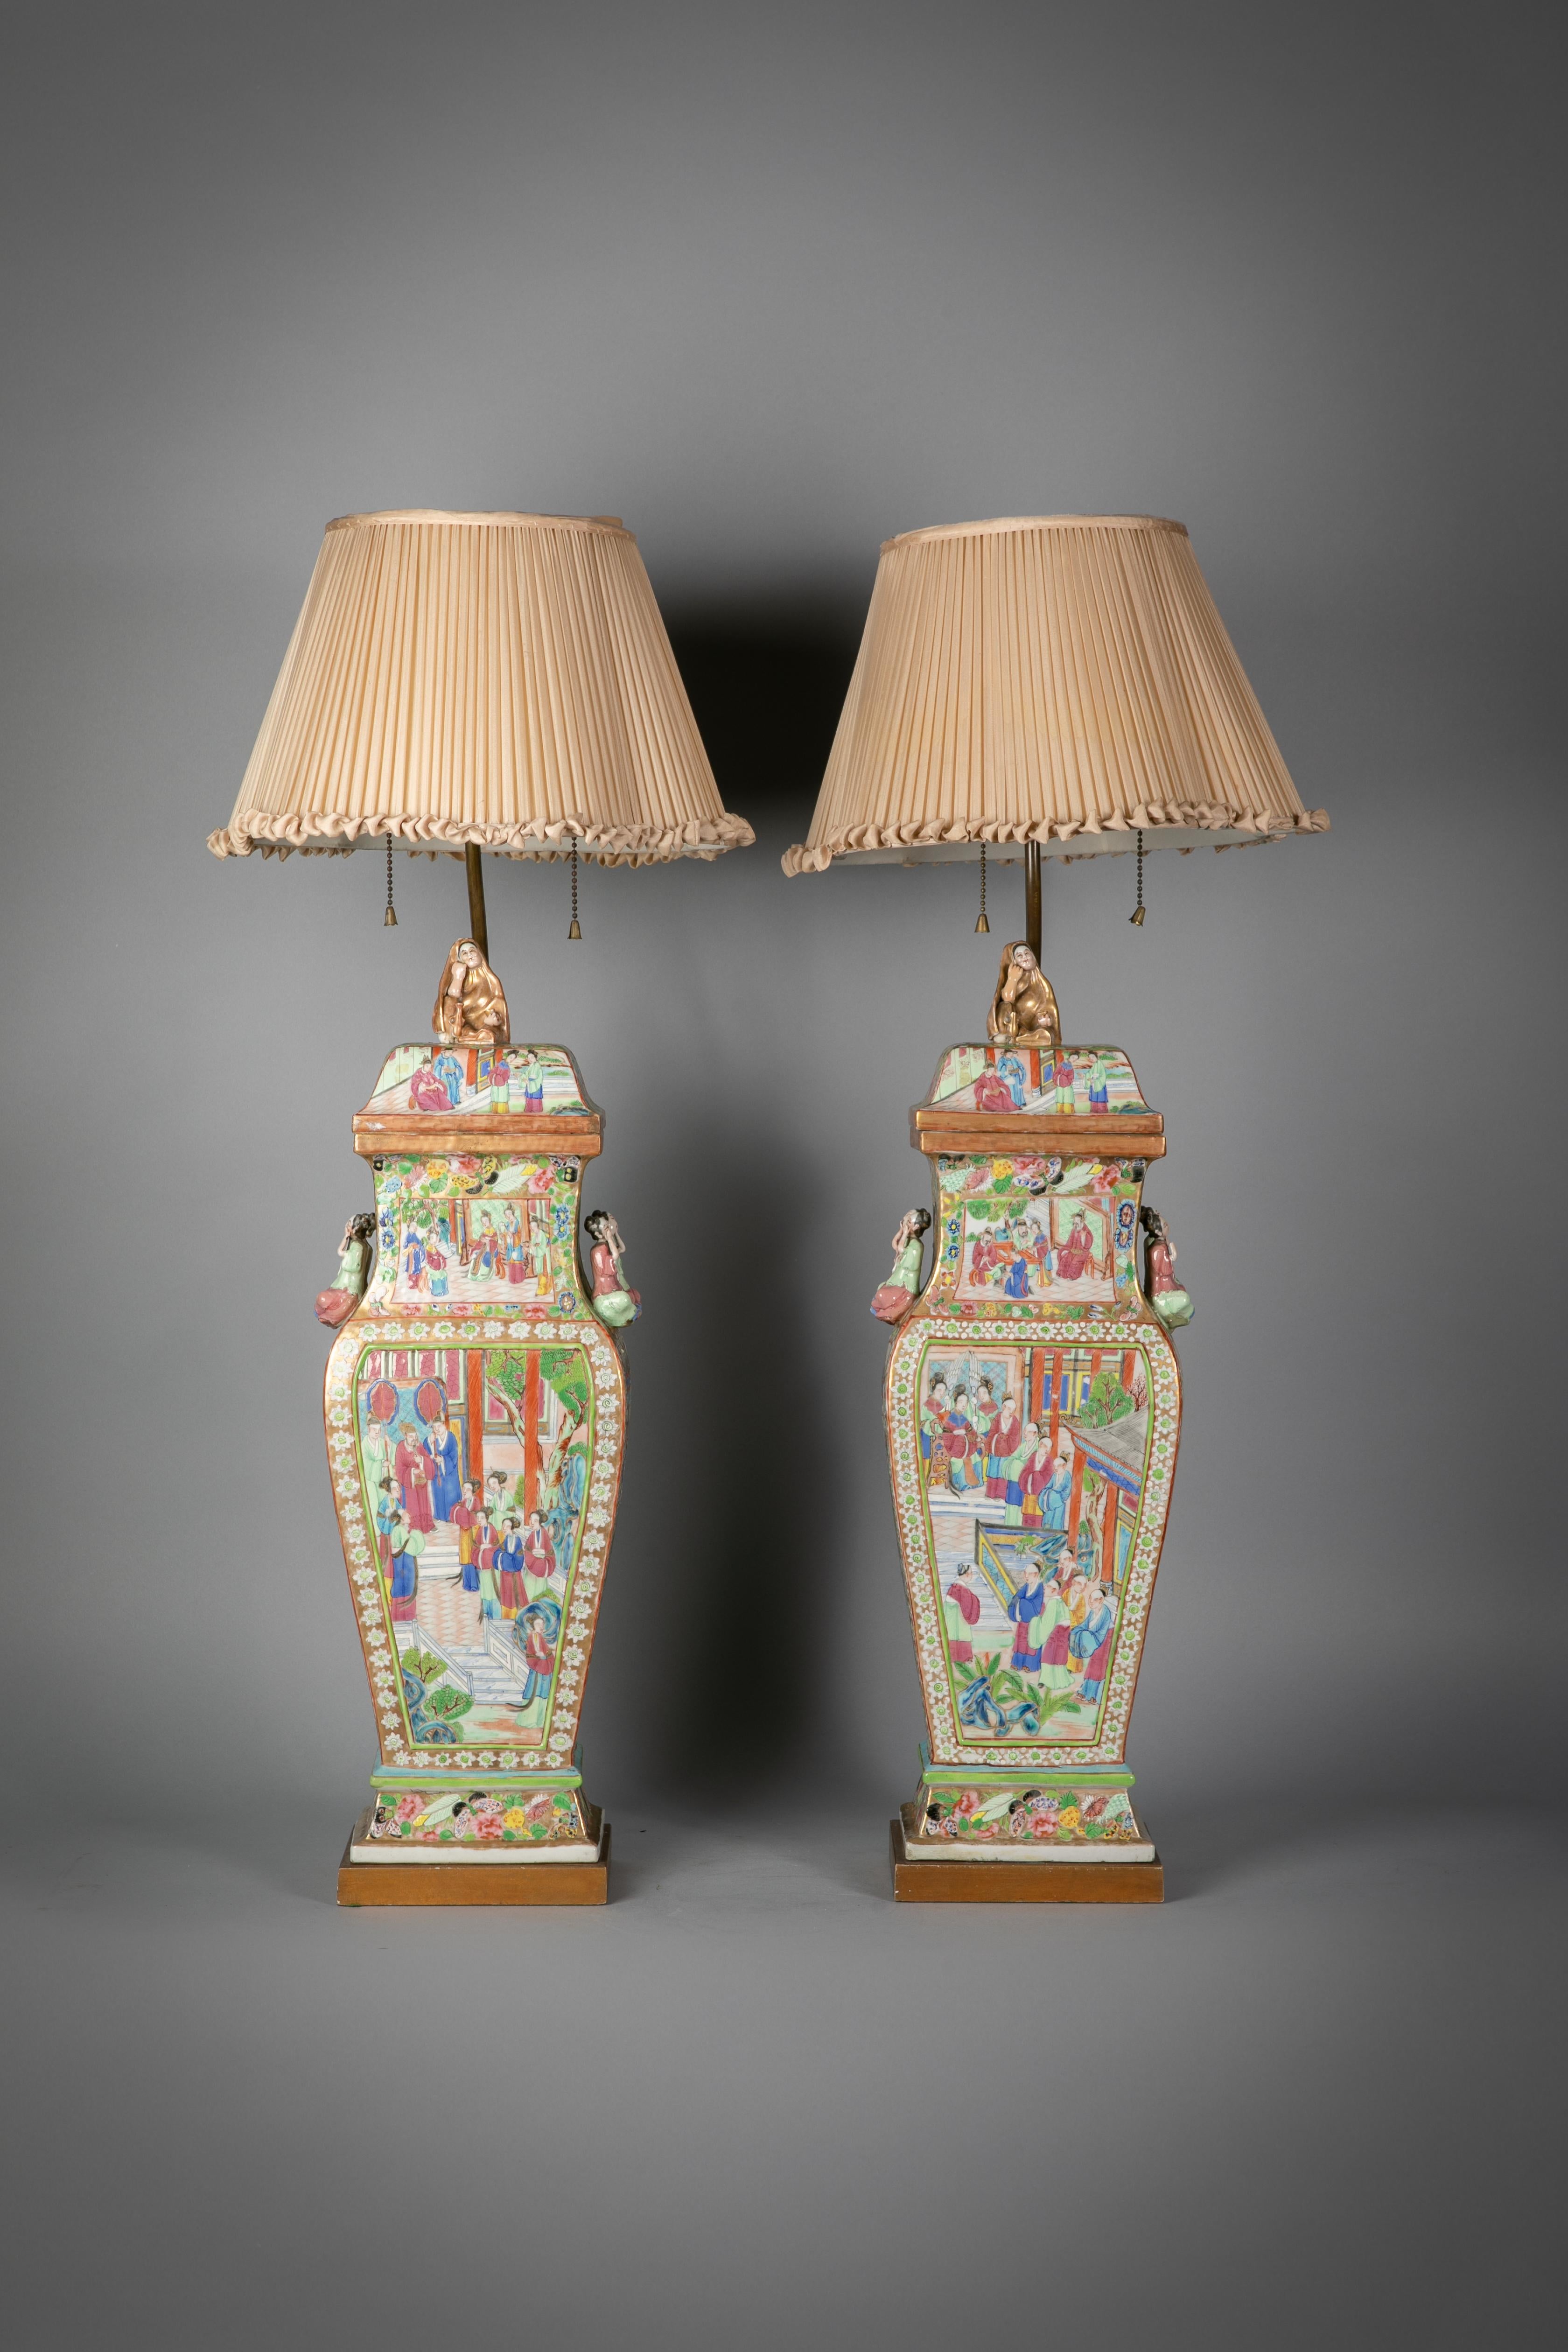 Pair of Fine Chinese Porcelain Rose Mandarin Covered Vases as Lamps, Circa 1840 For Sale 5